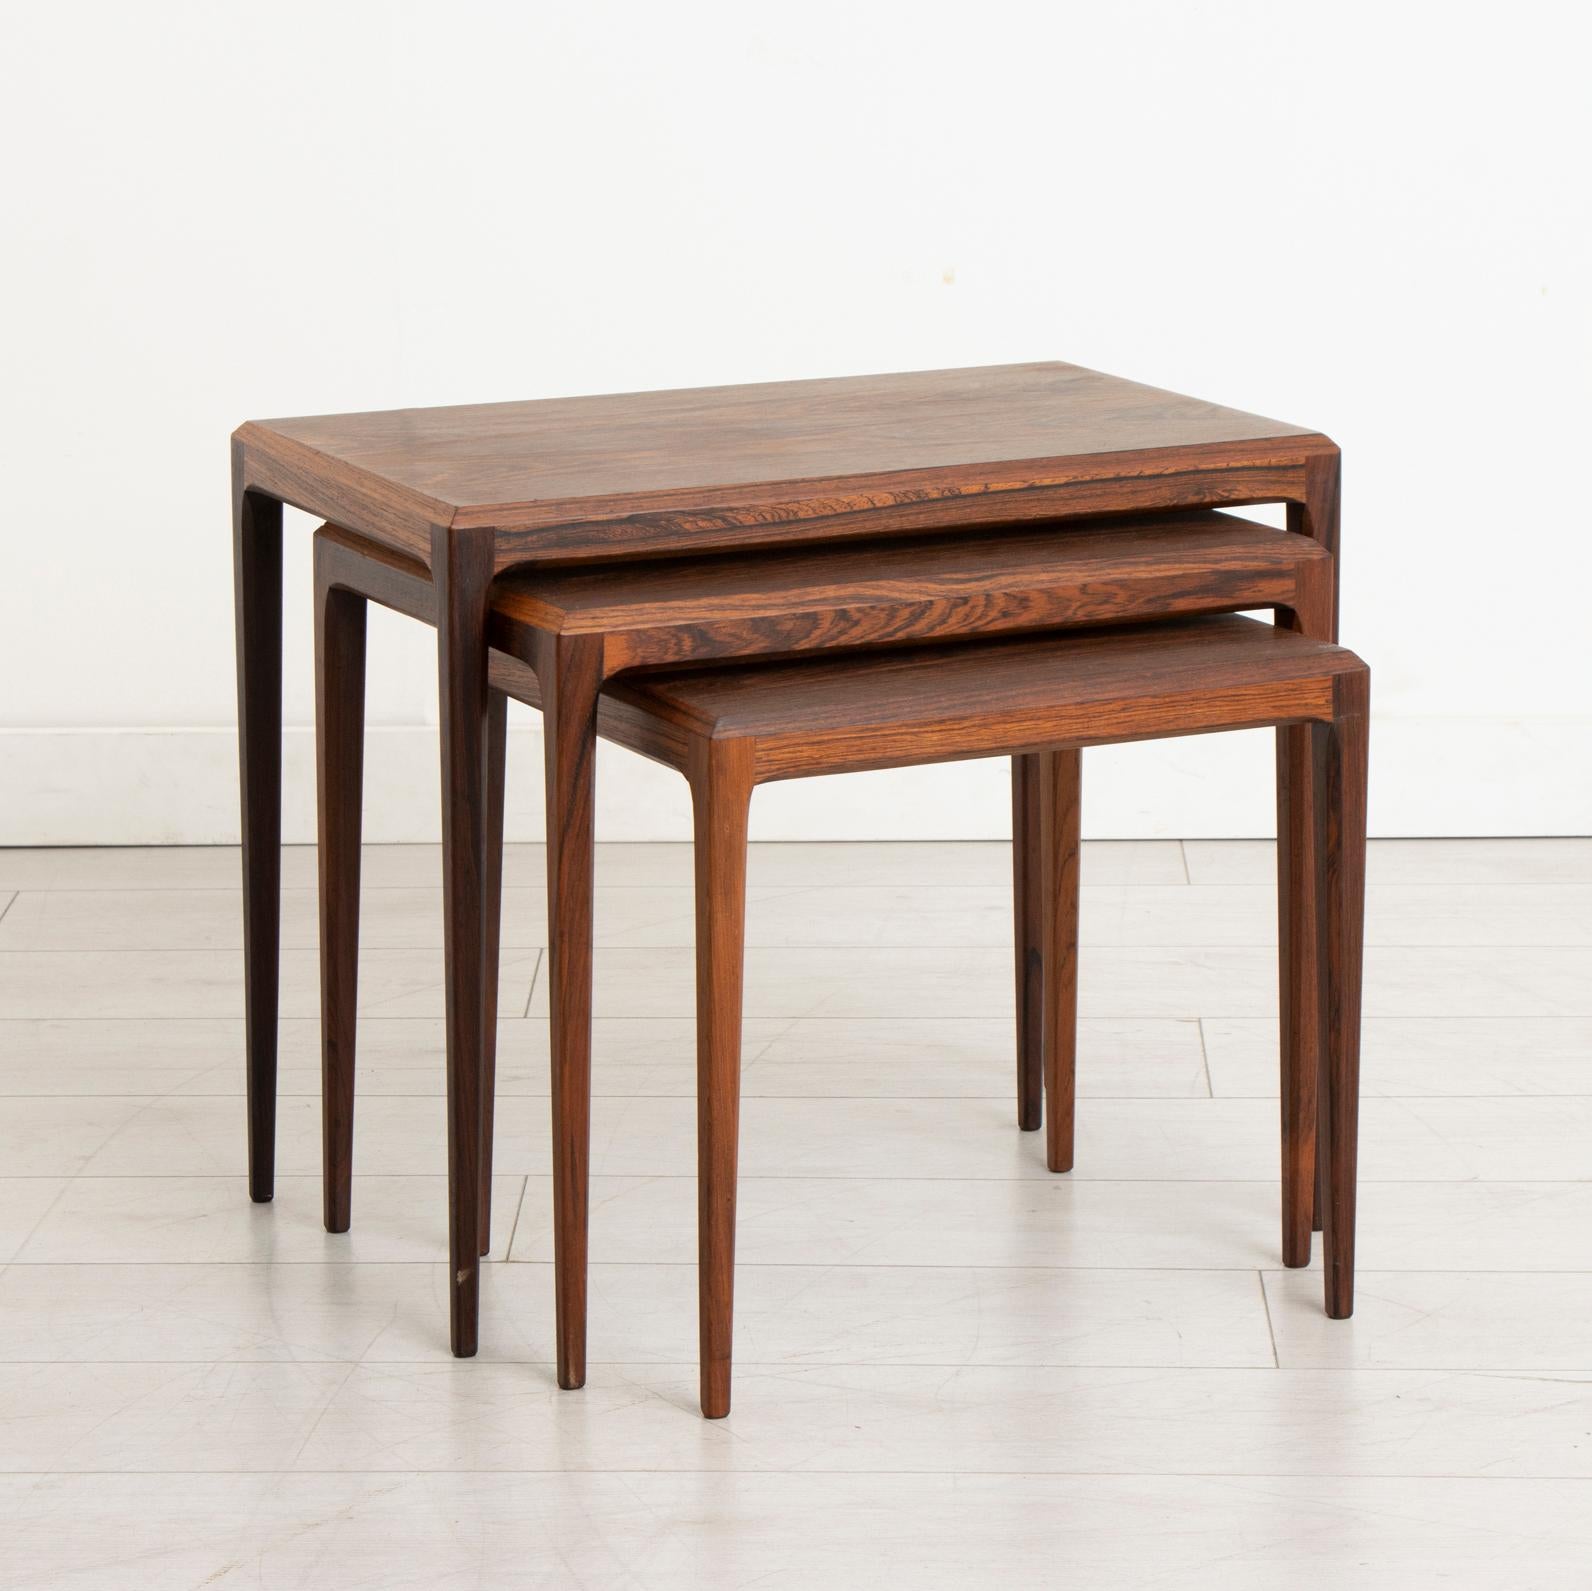 A Danish midcentury nest of three table made in rosewood and designed by Johannes Andersen for Silkeborg. Makers mark underneath.

Dimensions: W 60 x D3 6 x H 51 cm.